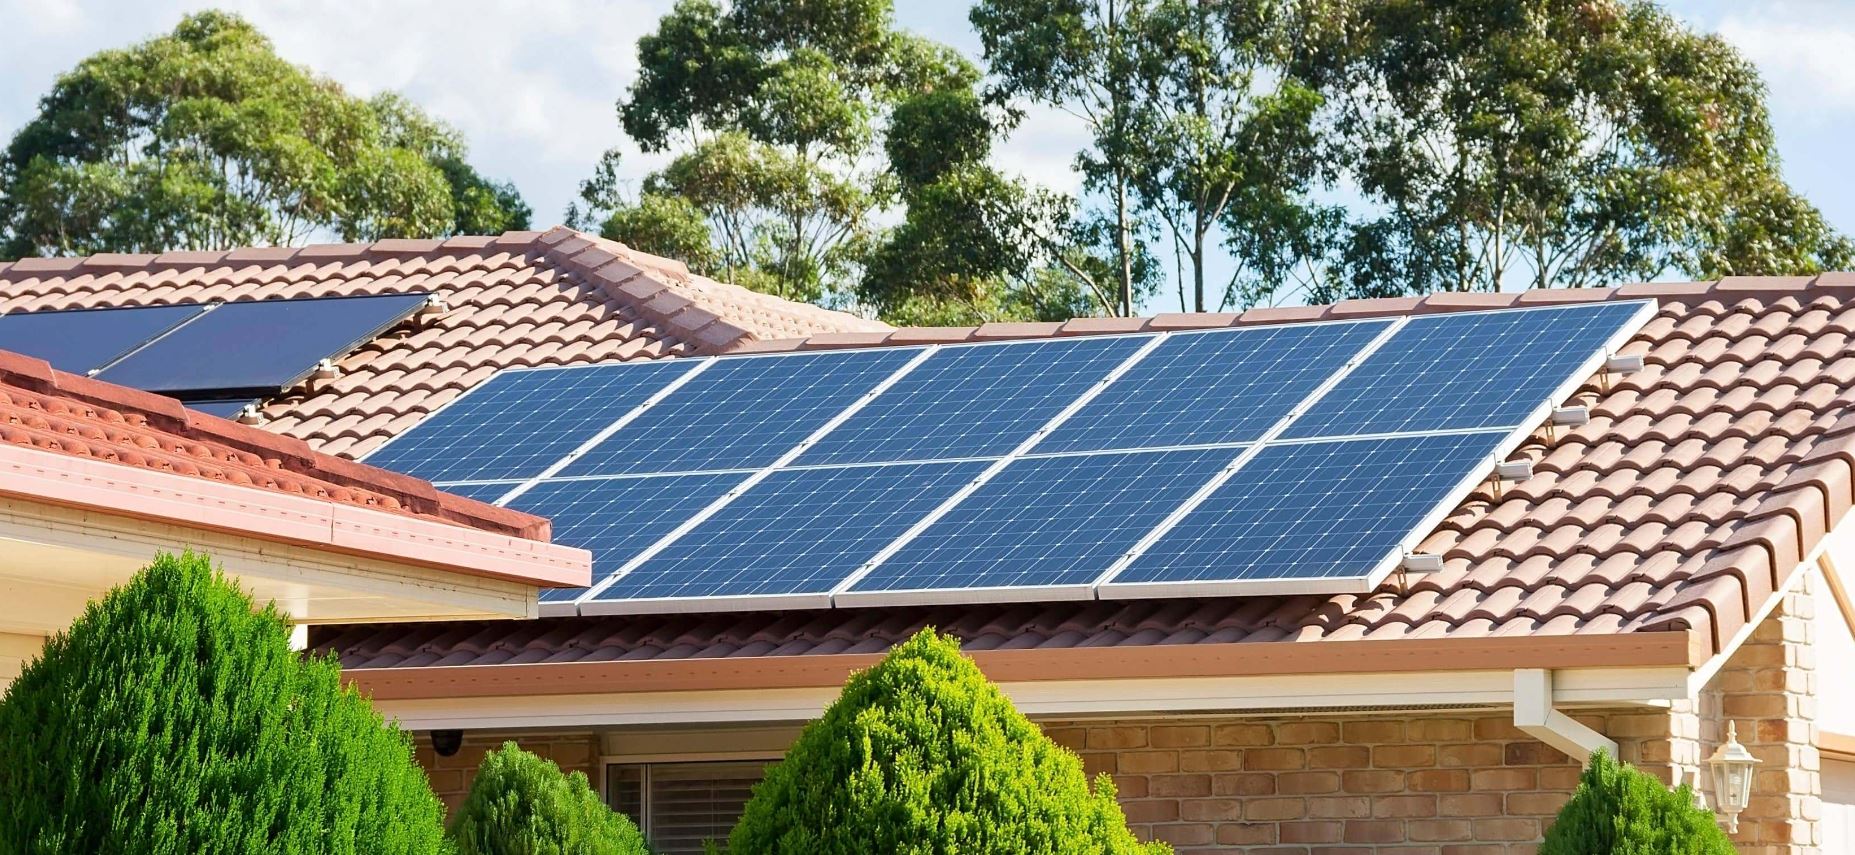 The Benefits of Installing Solar Panels for Your Home